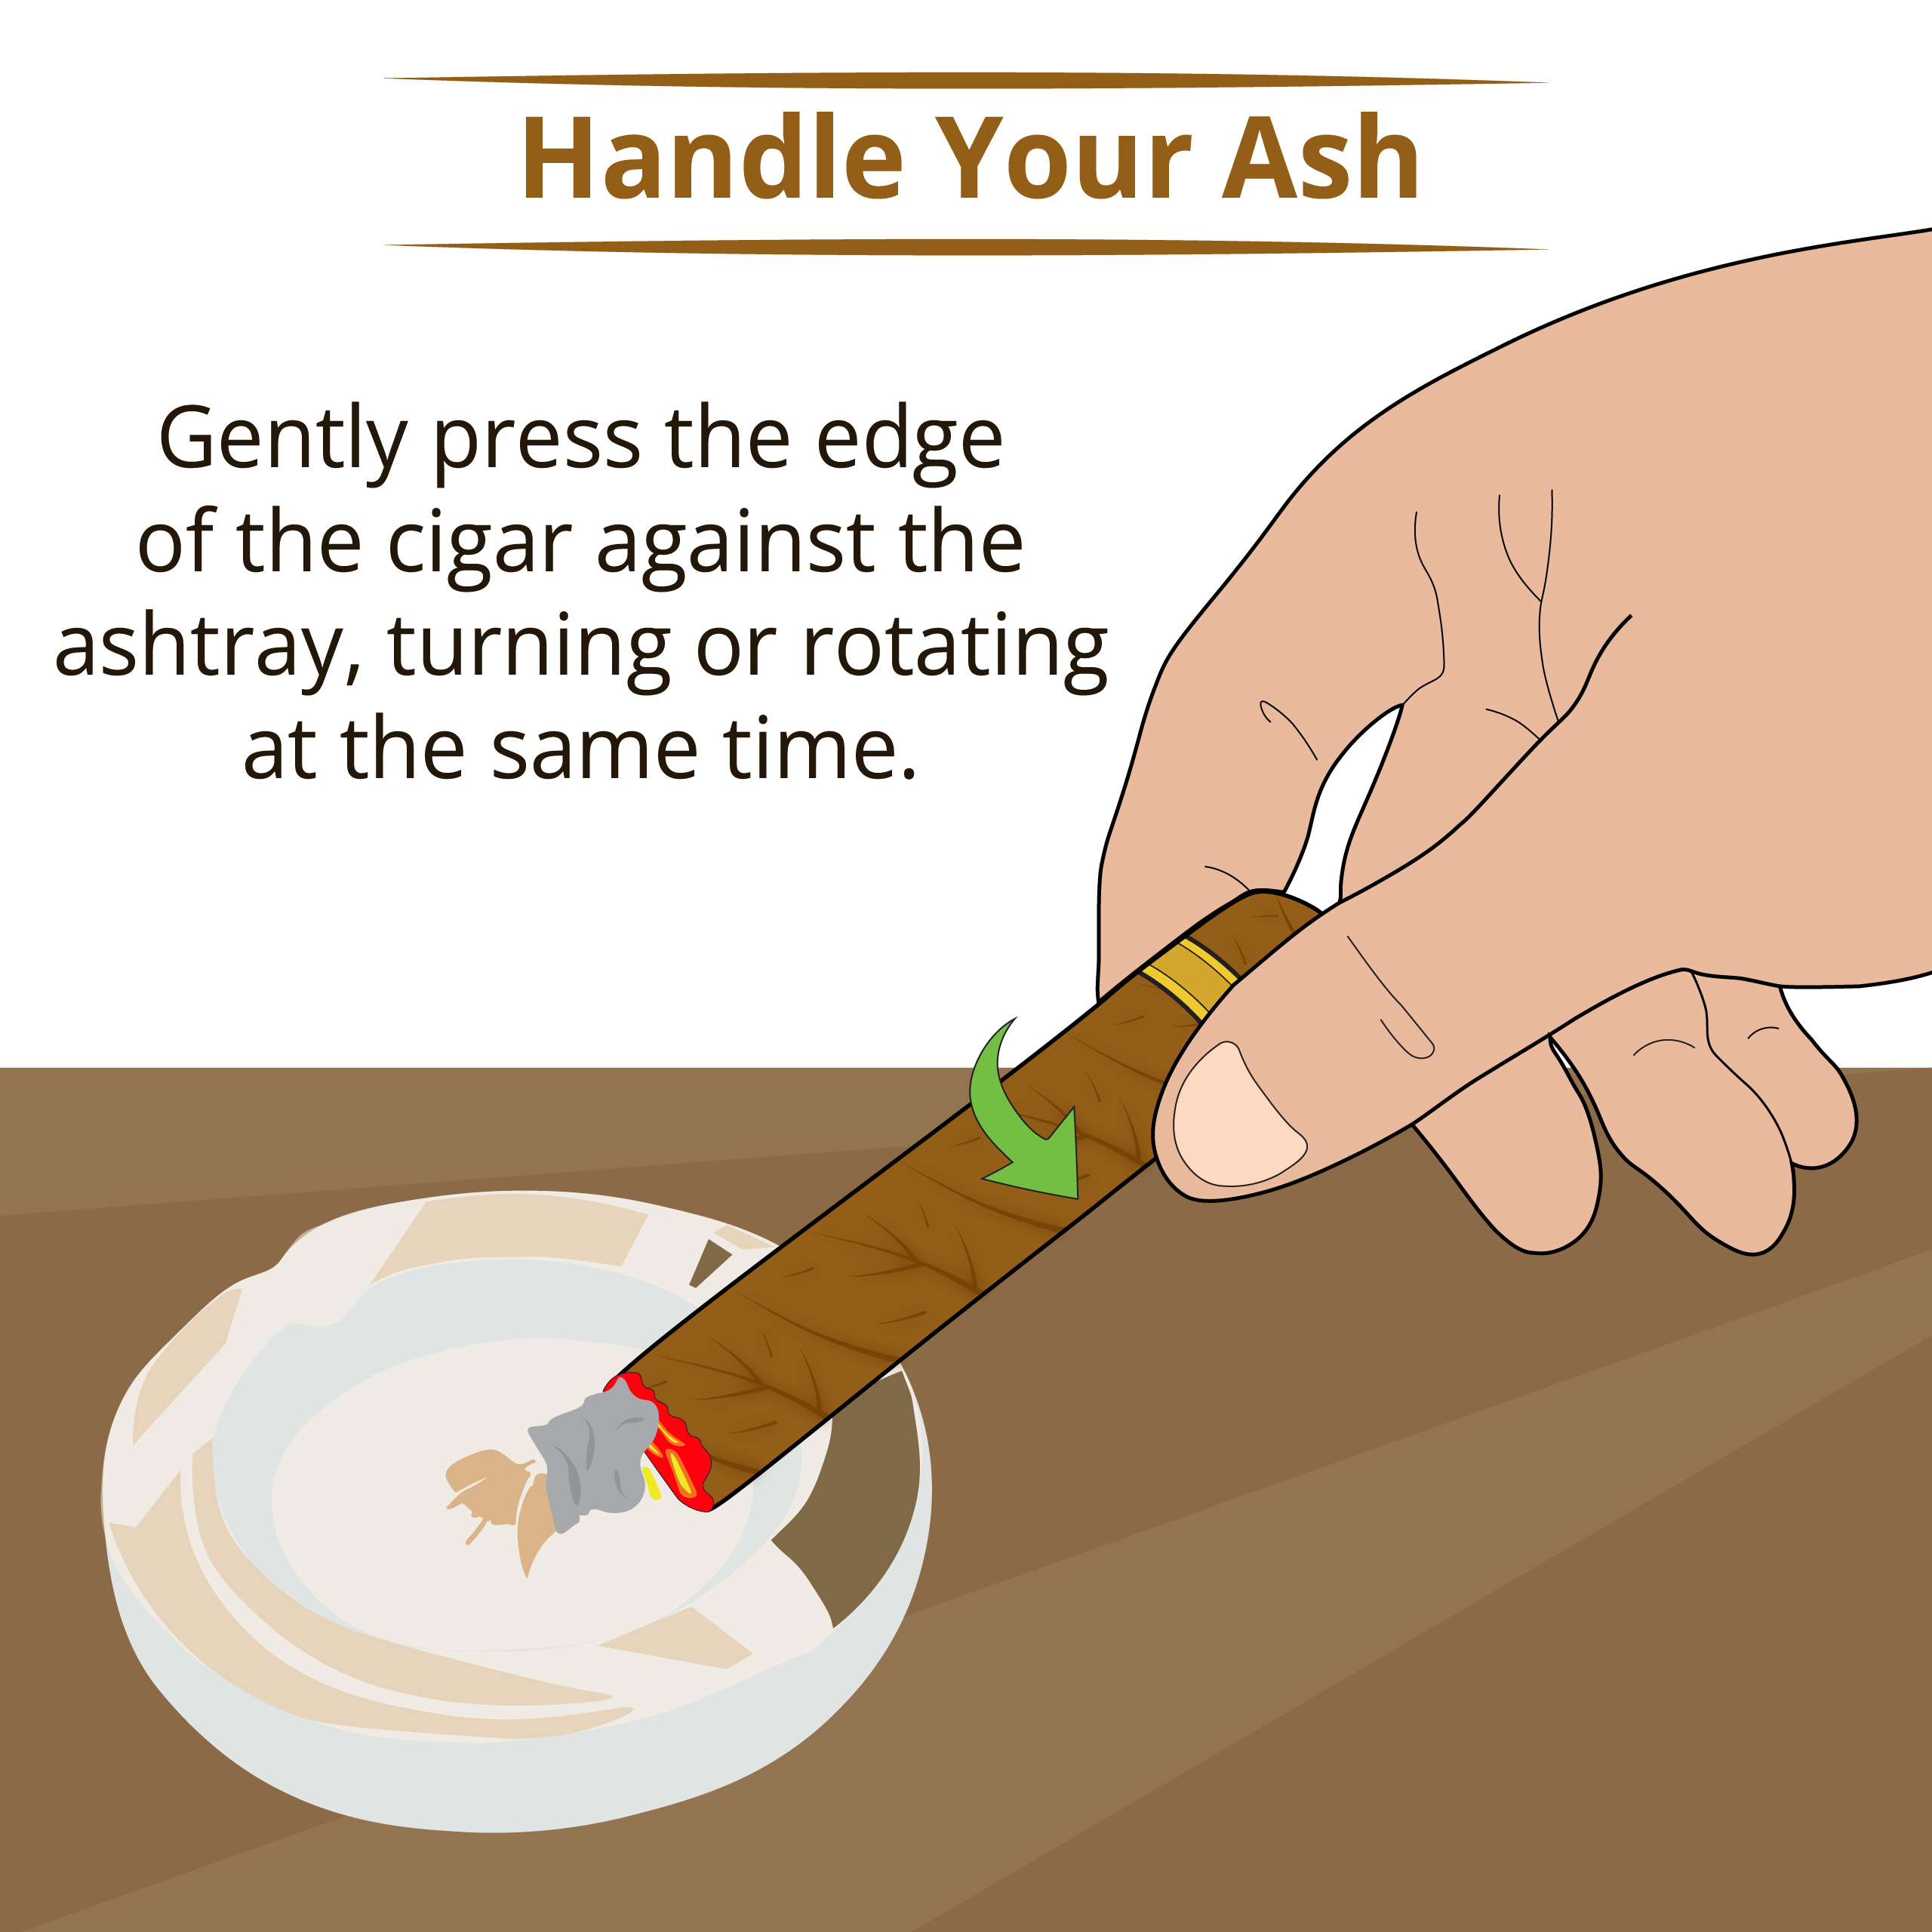 How to ash a cigar properly